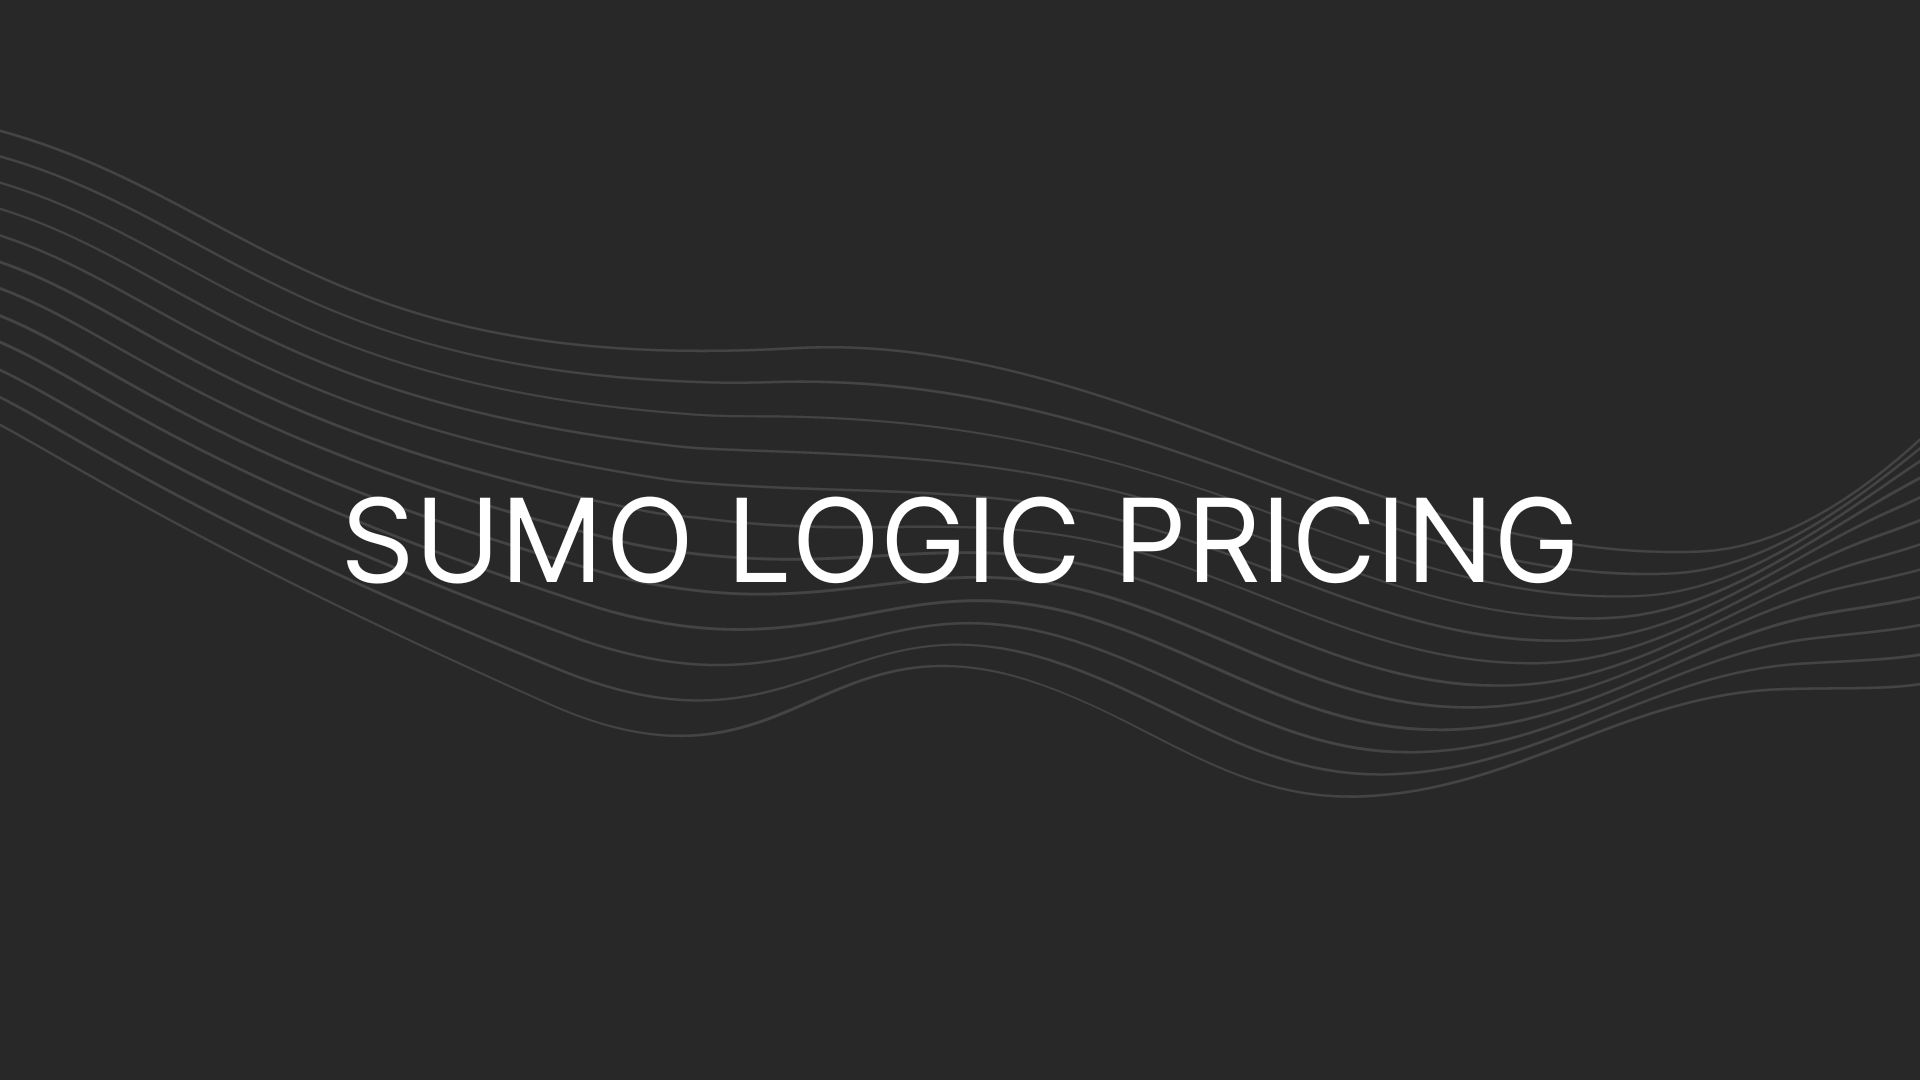 Sumo Logic Pricing – Actual Prices for All Plans.